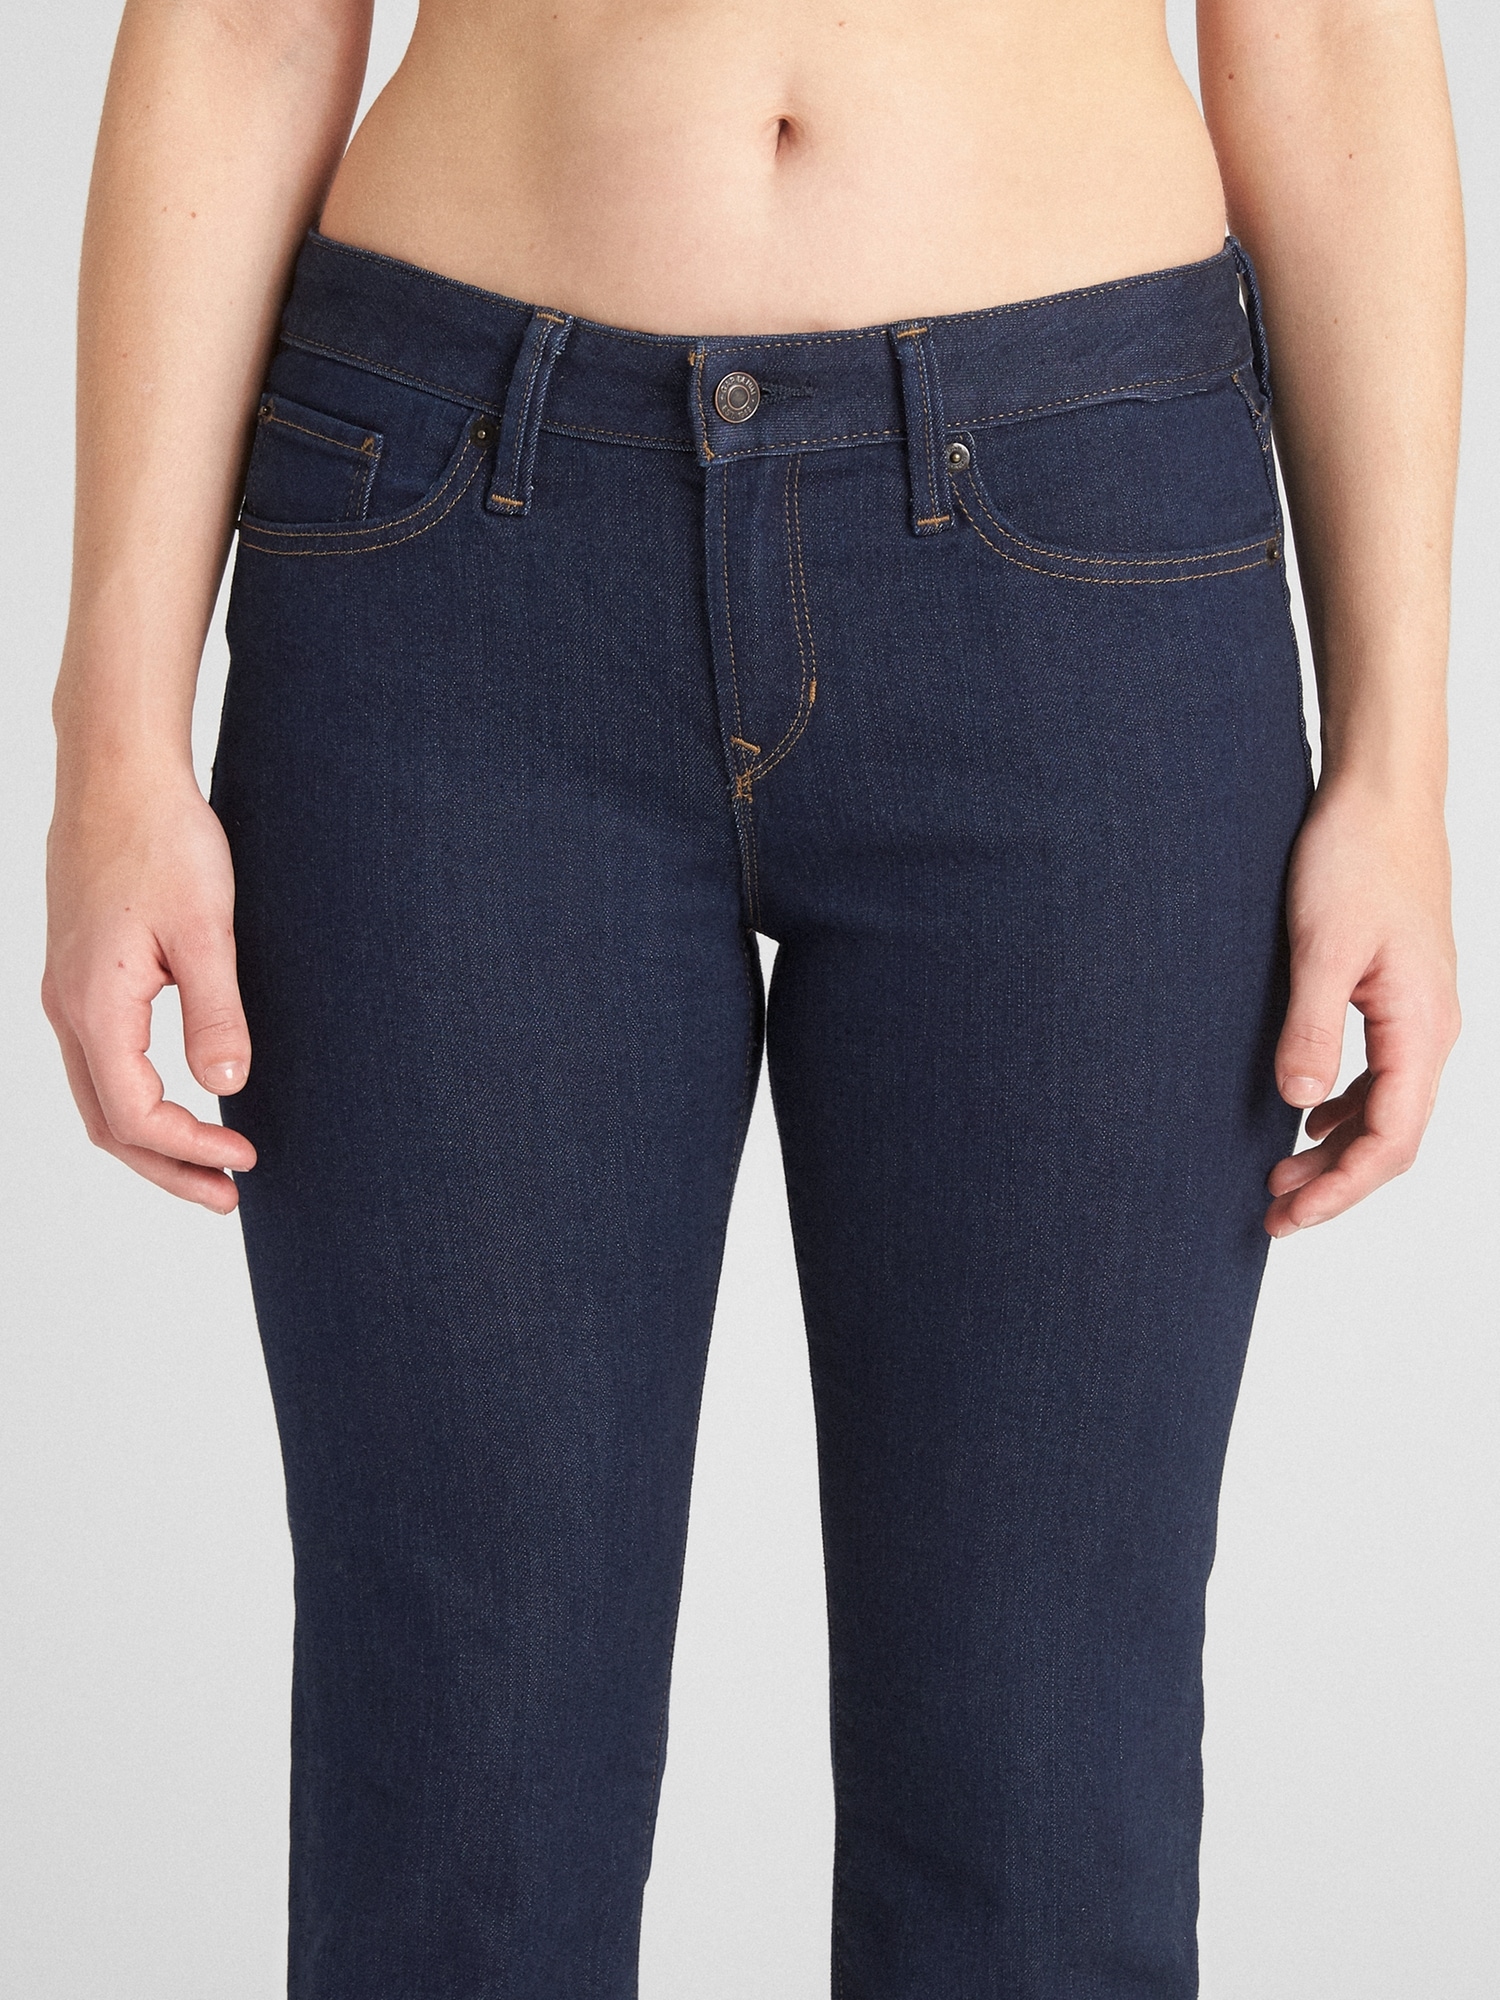 gap 1969 long and lean jeans